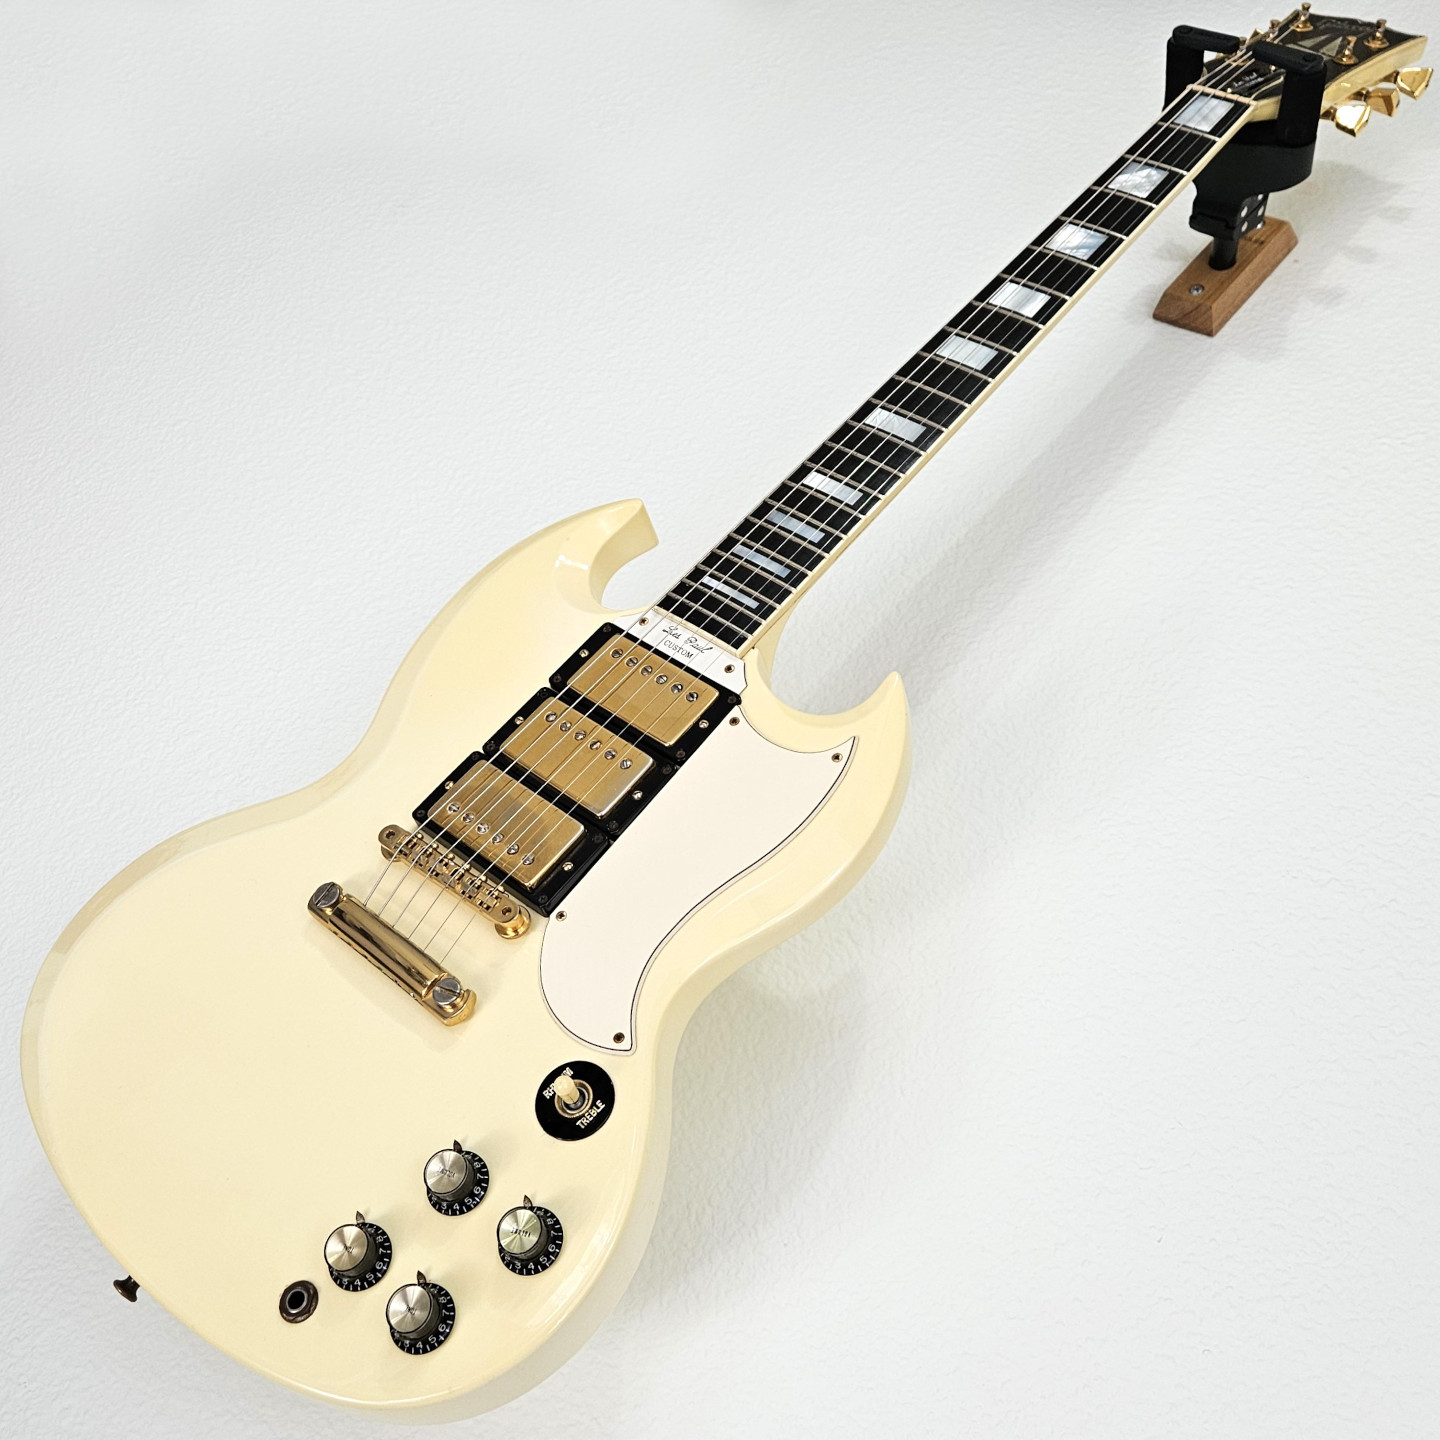 1992 Gibson Historic '61 Les Paul SG Reissue Custom Antique Ivory White 3-Pickup '62 Vintage Electric Guitar